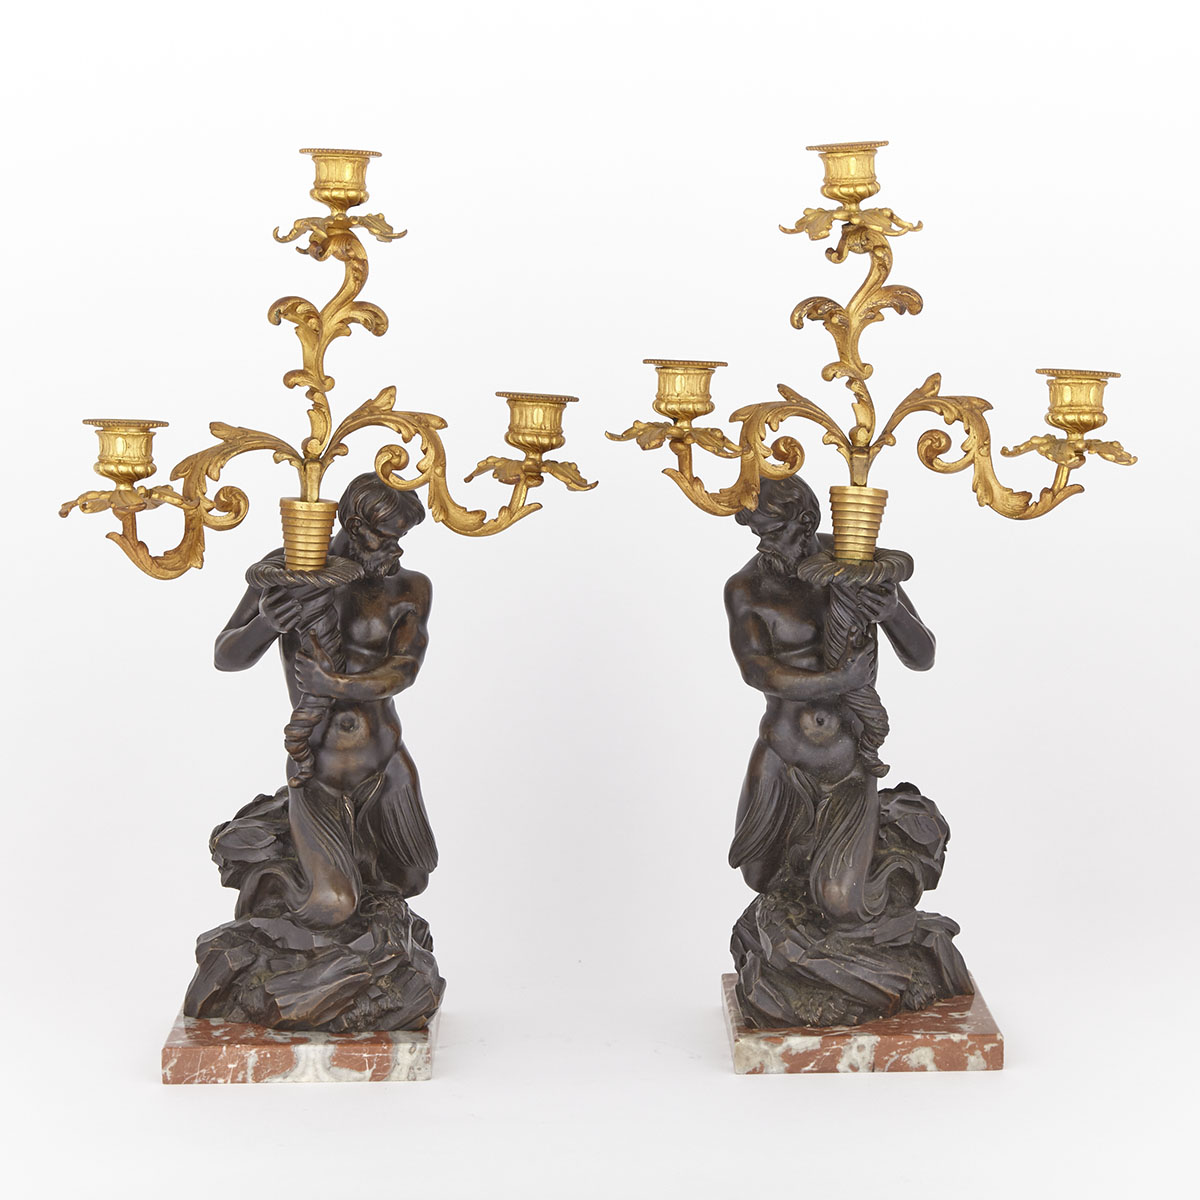 Pair of Italian Patinated Bronze Figures of Tritons after the Models by GIAN LORENZO BERNINI (1598-1680), 19th century